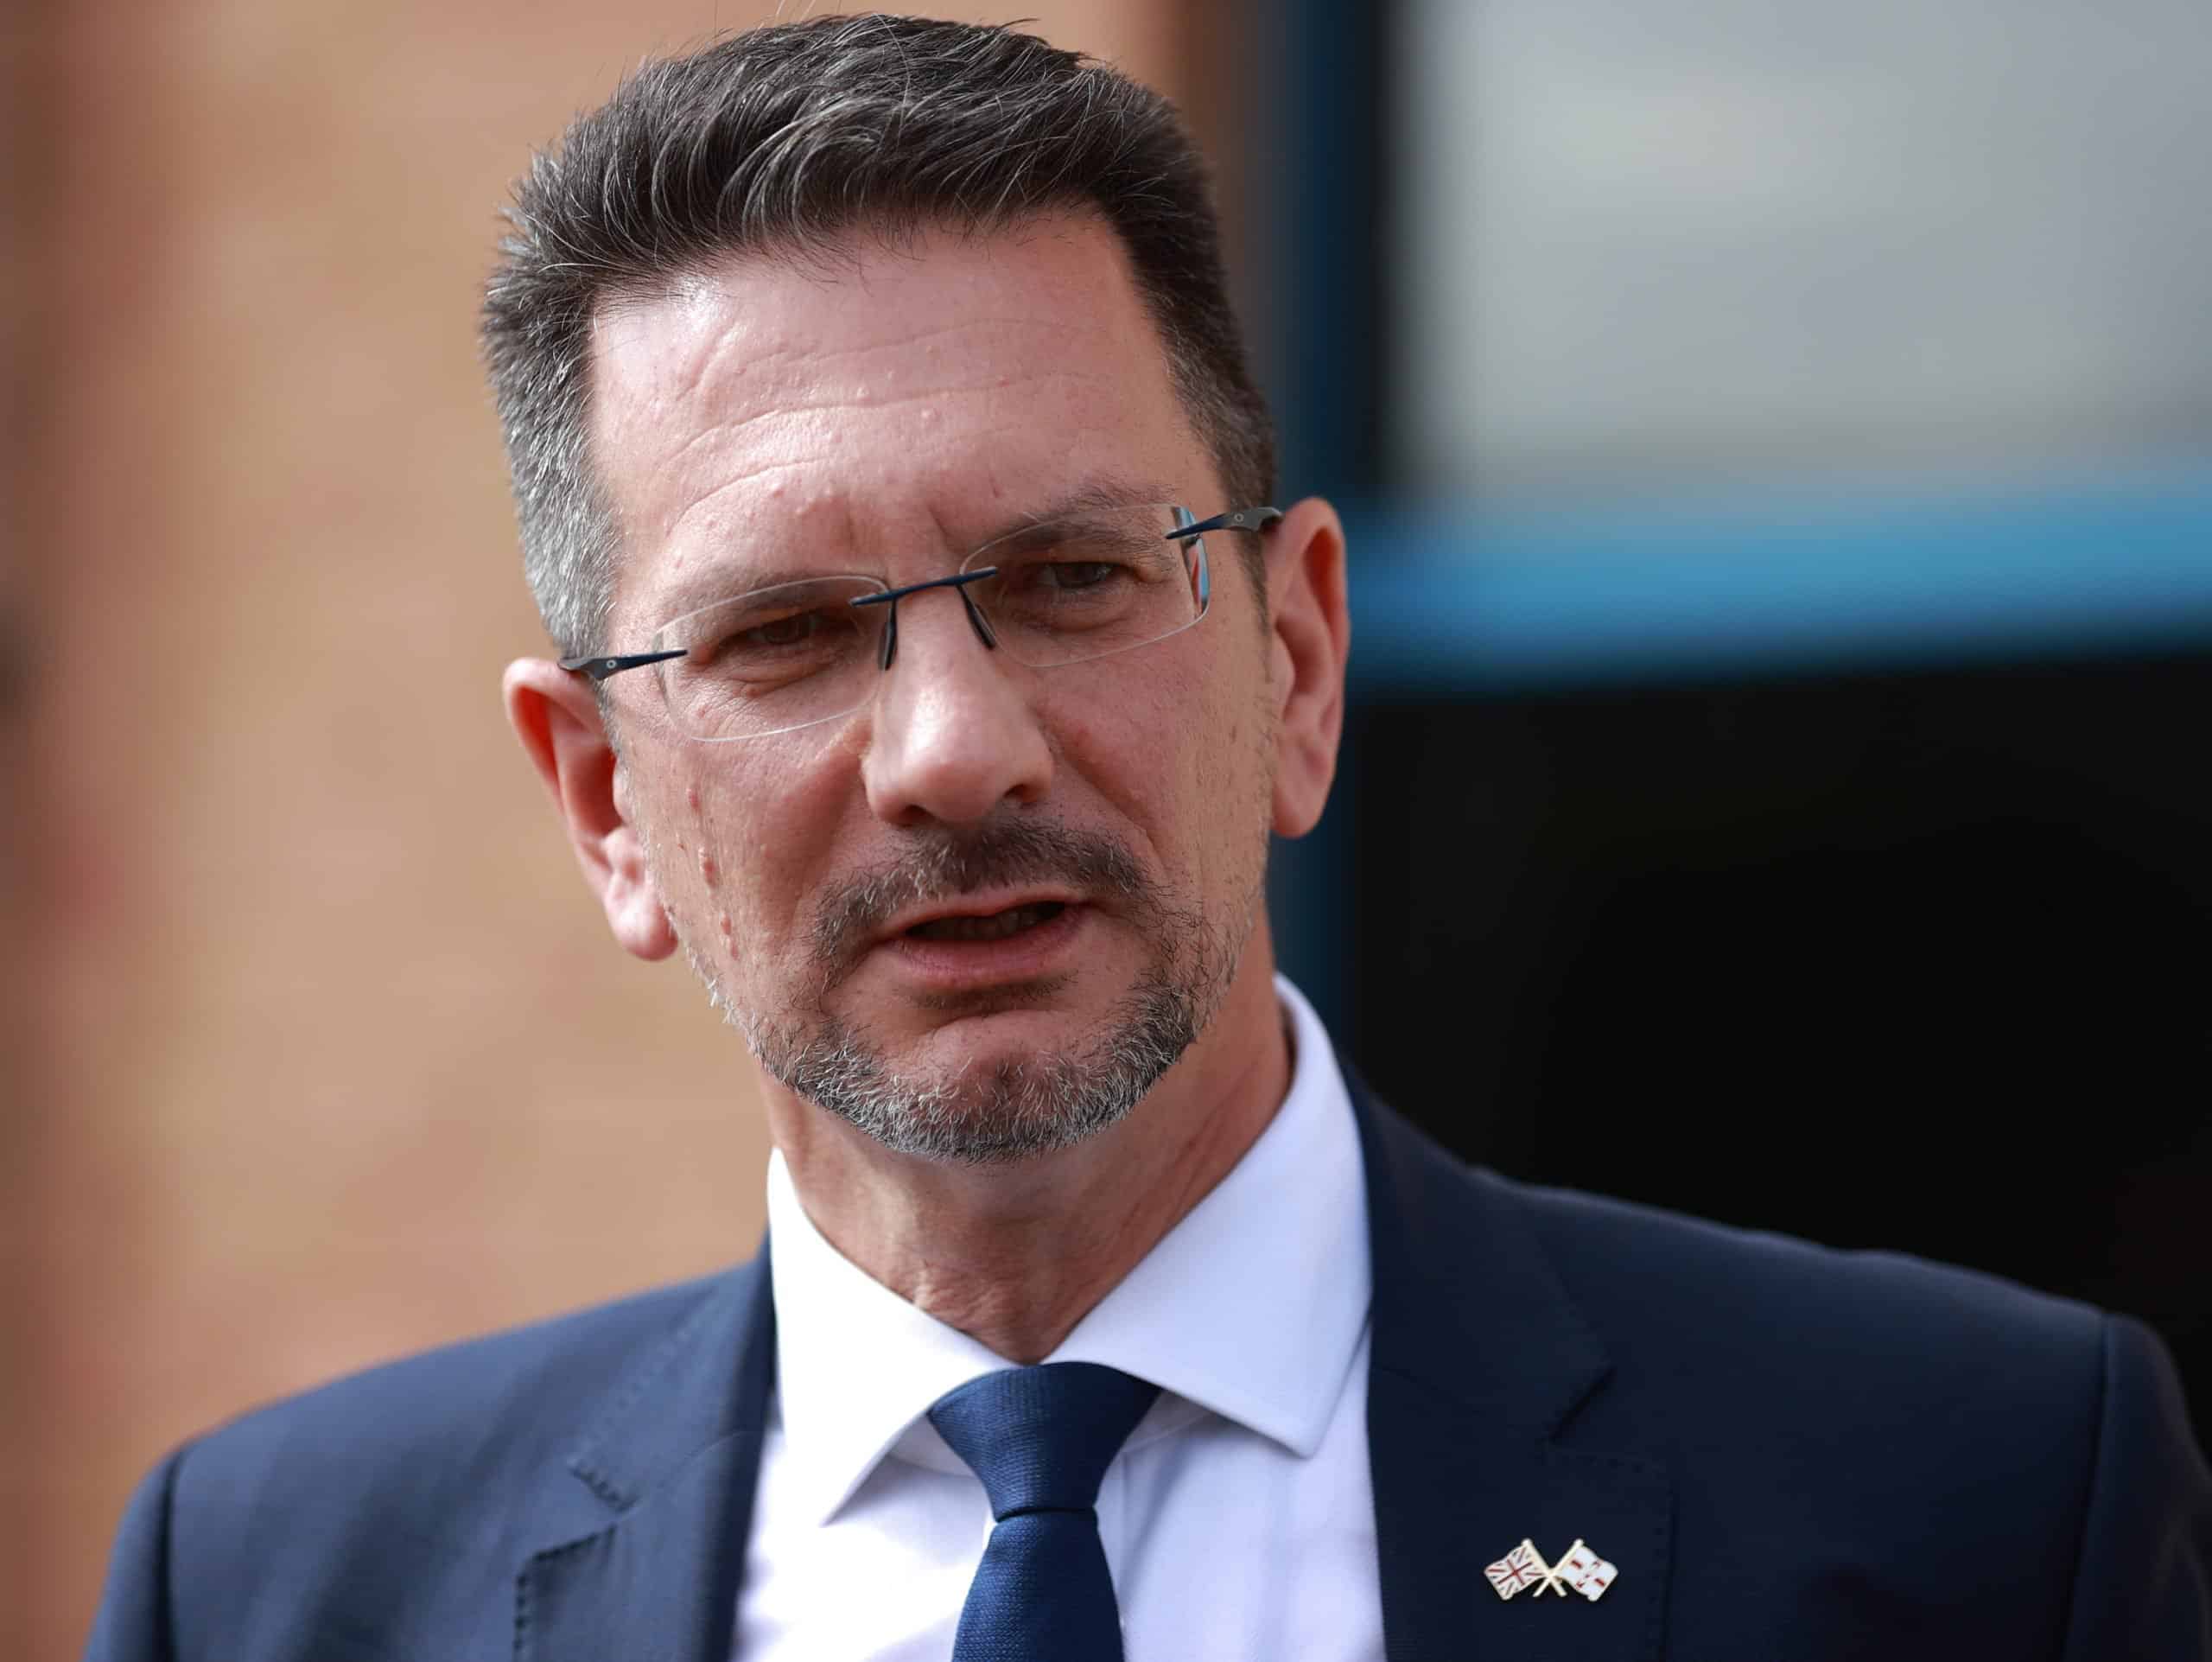 Steve Baker to launch Tory leadership bid if party loses and he keeps seat